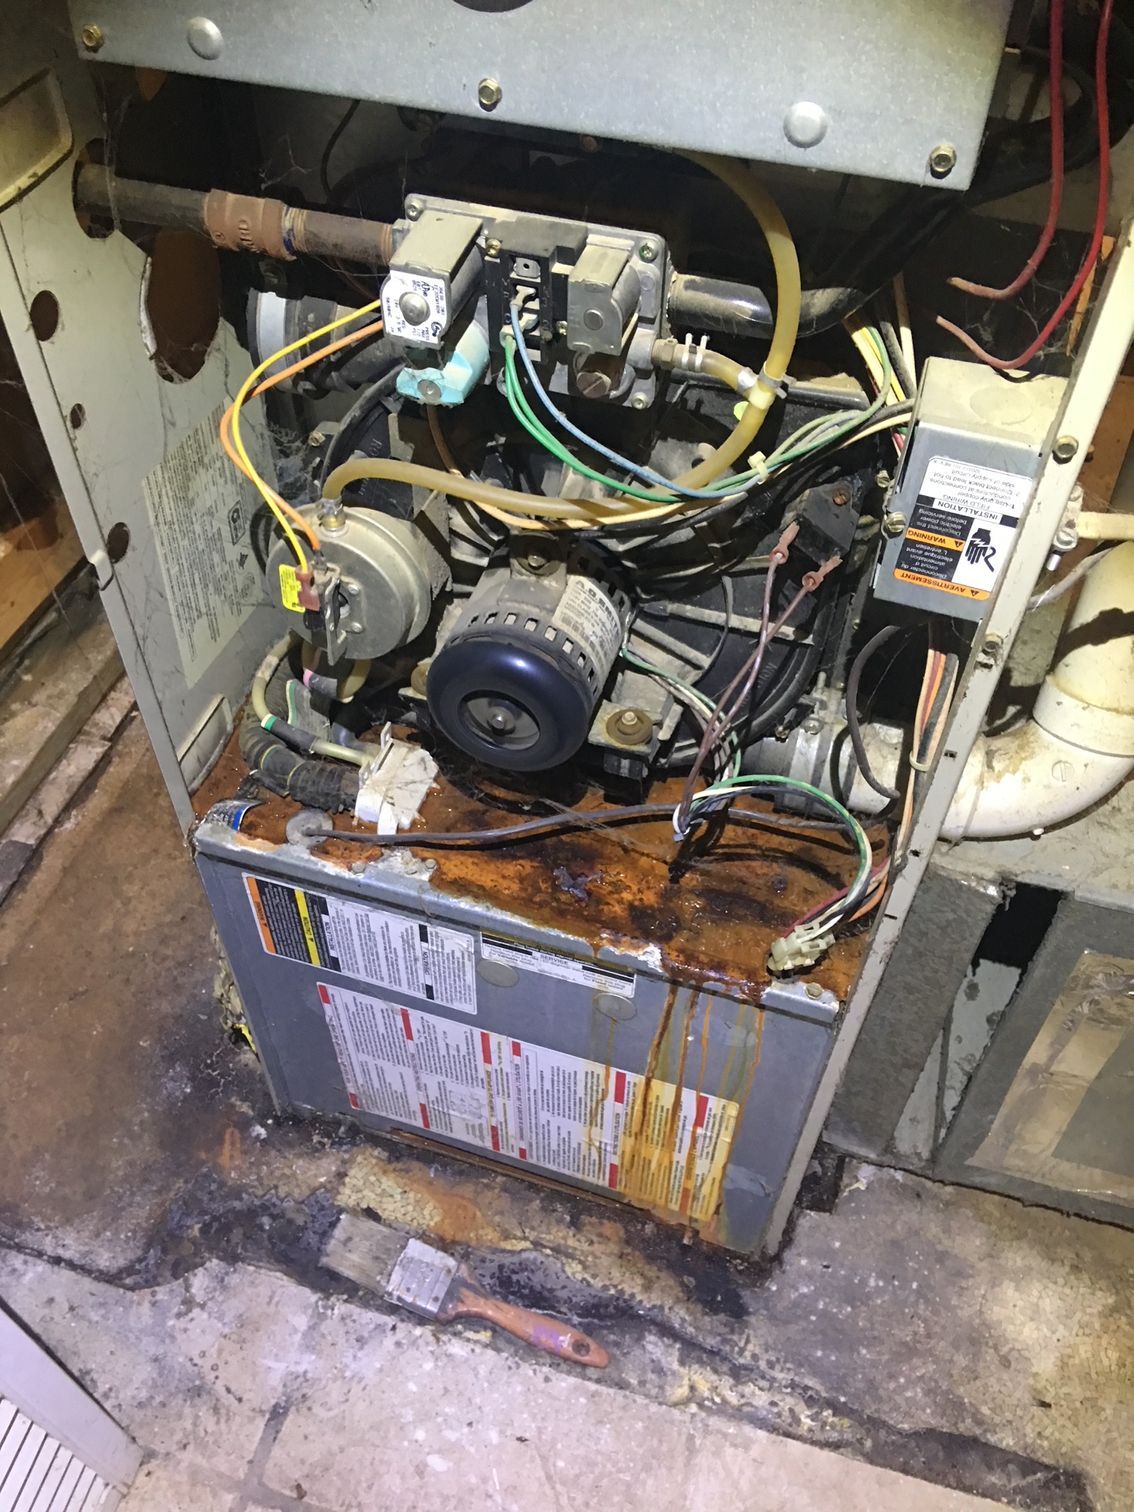 year old furnace improperly installed.